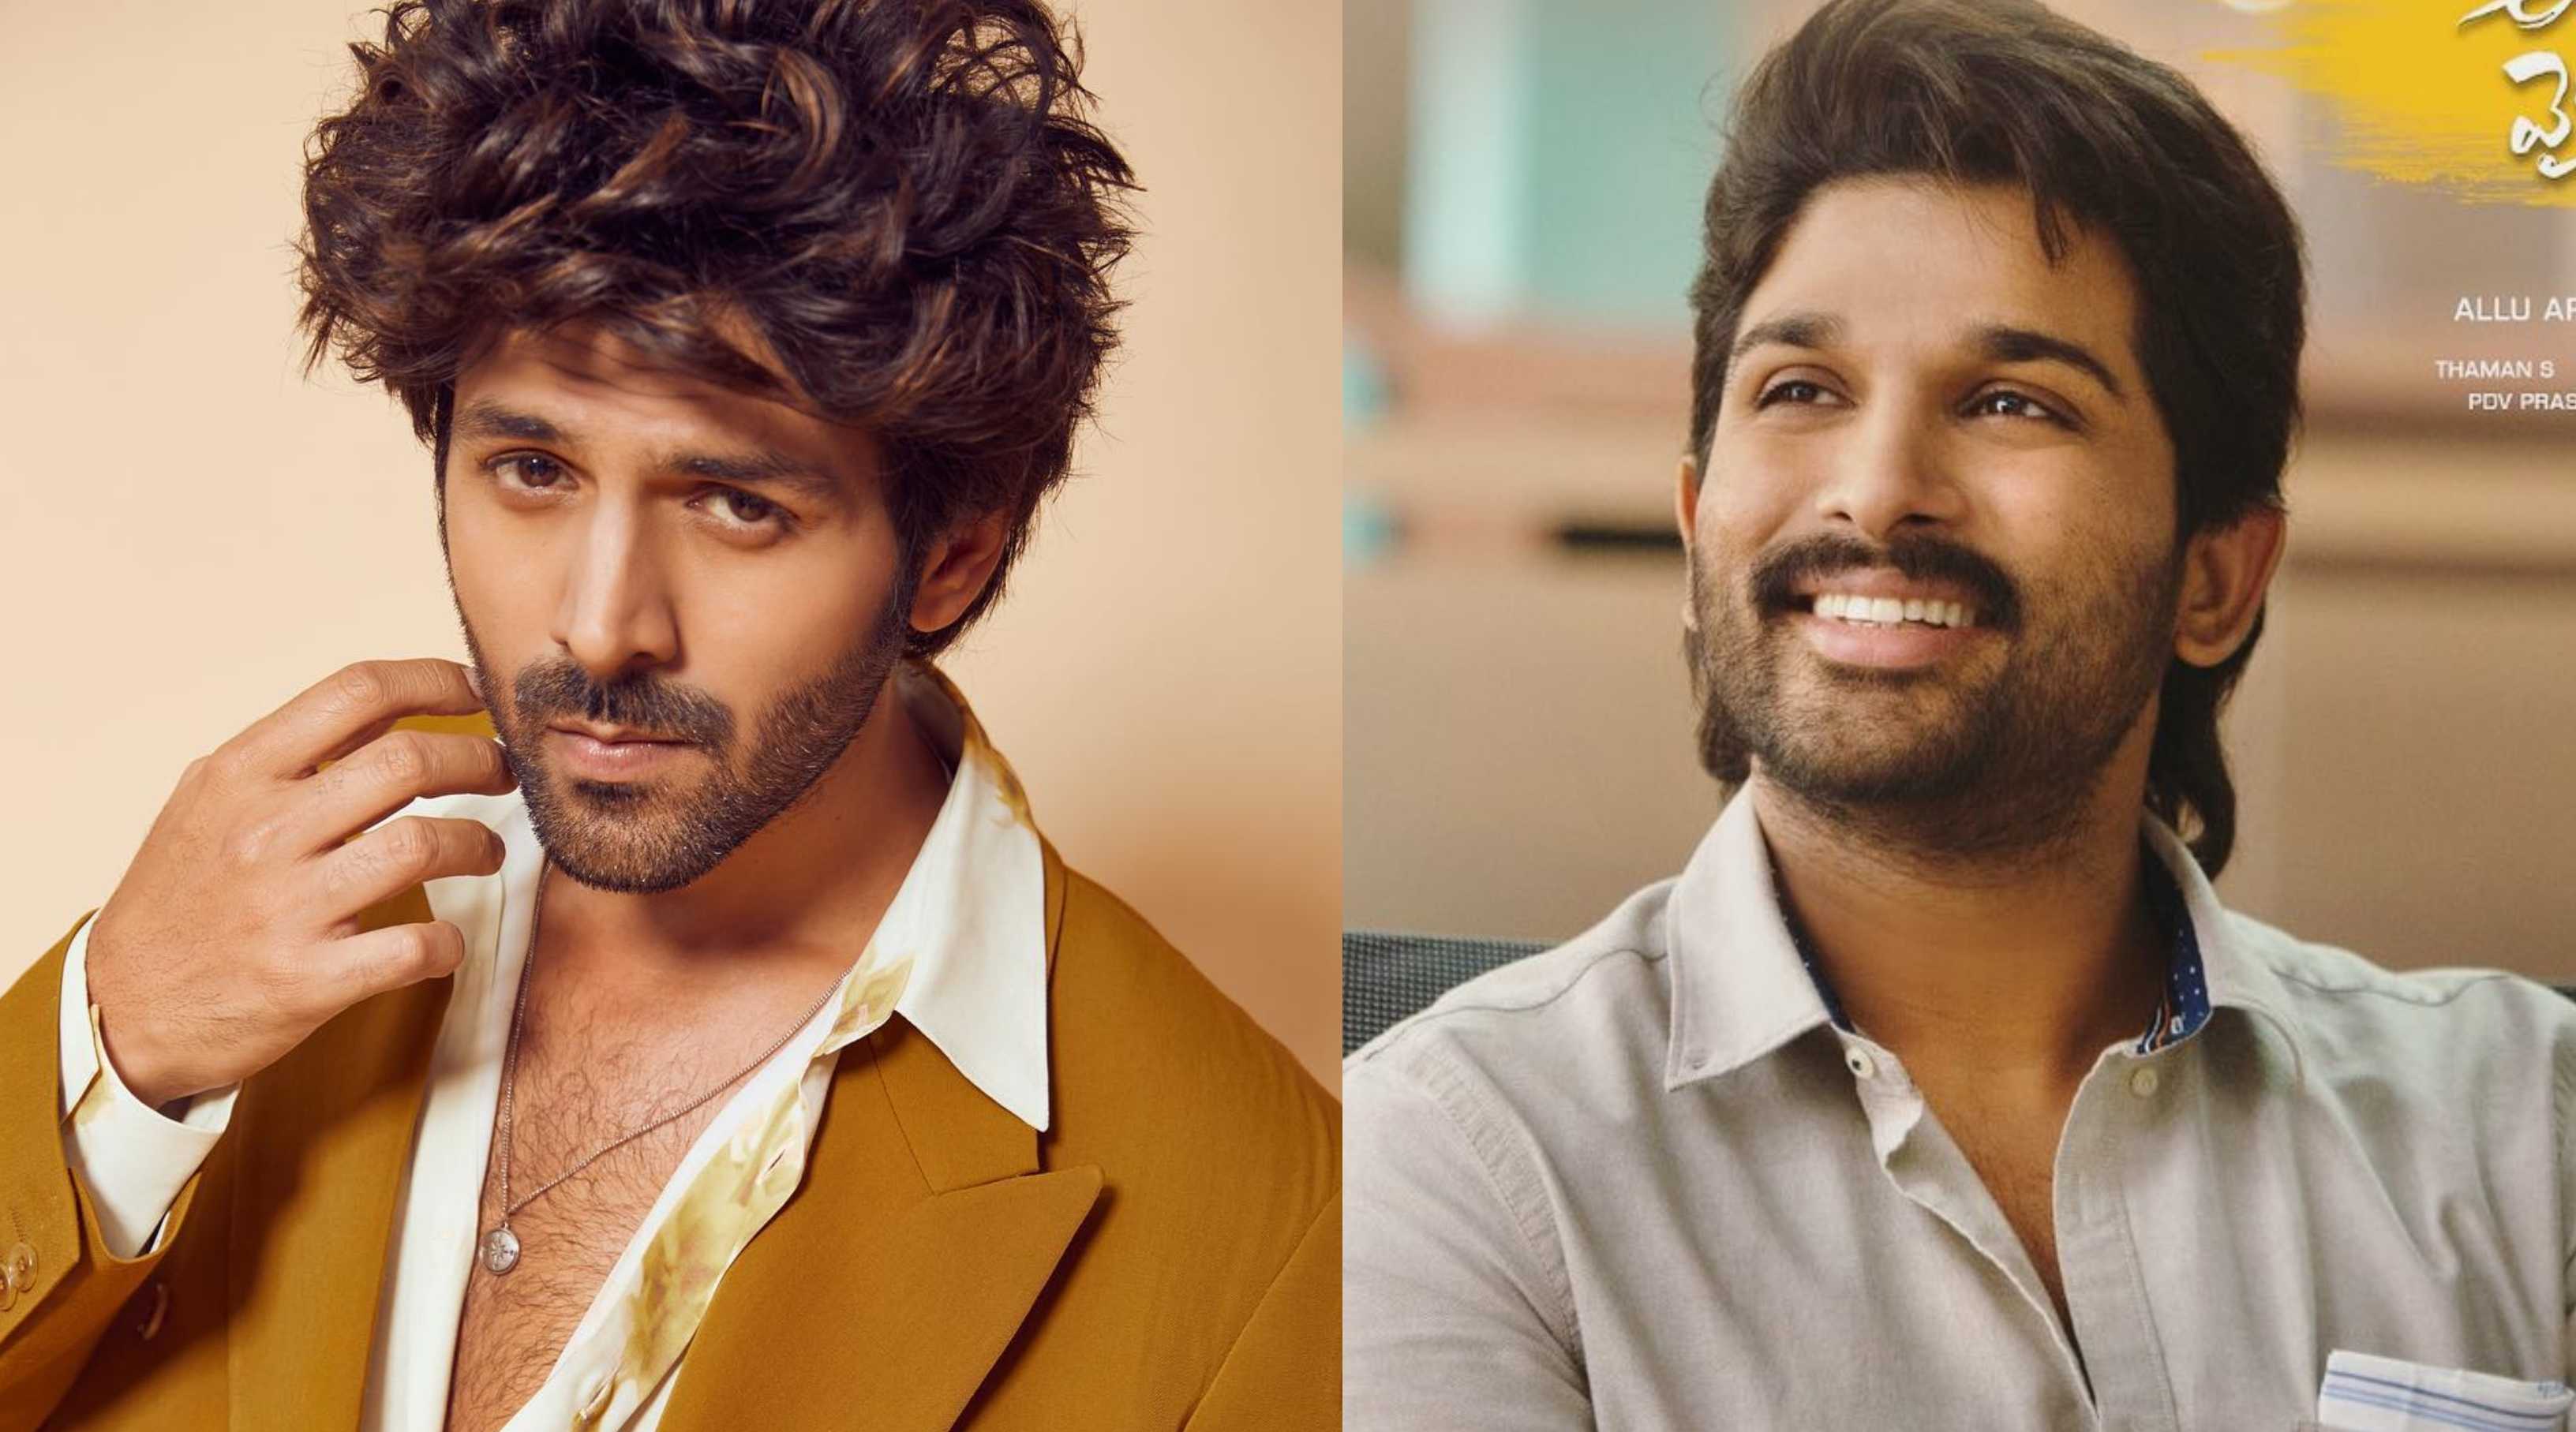 Kartik Aaryan on Ala Vaikunthapurramuloo remake: 'When the film comes out, Shehzada will have its own identity'